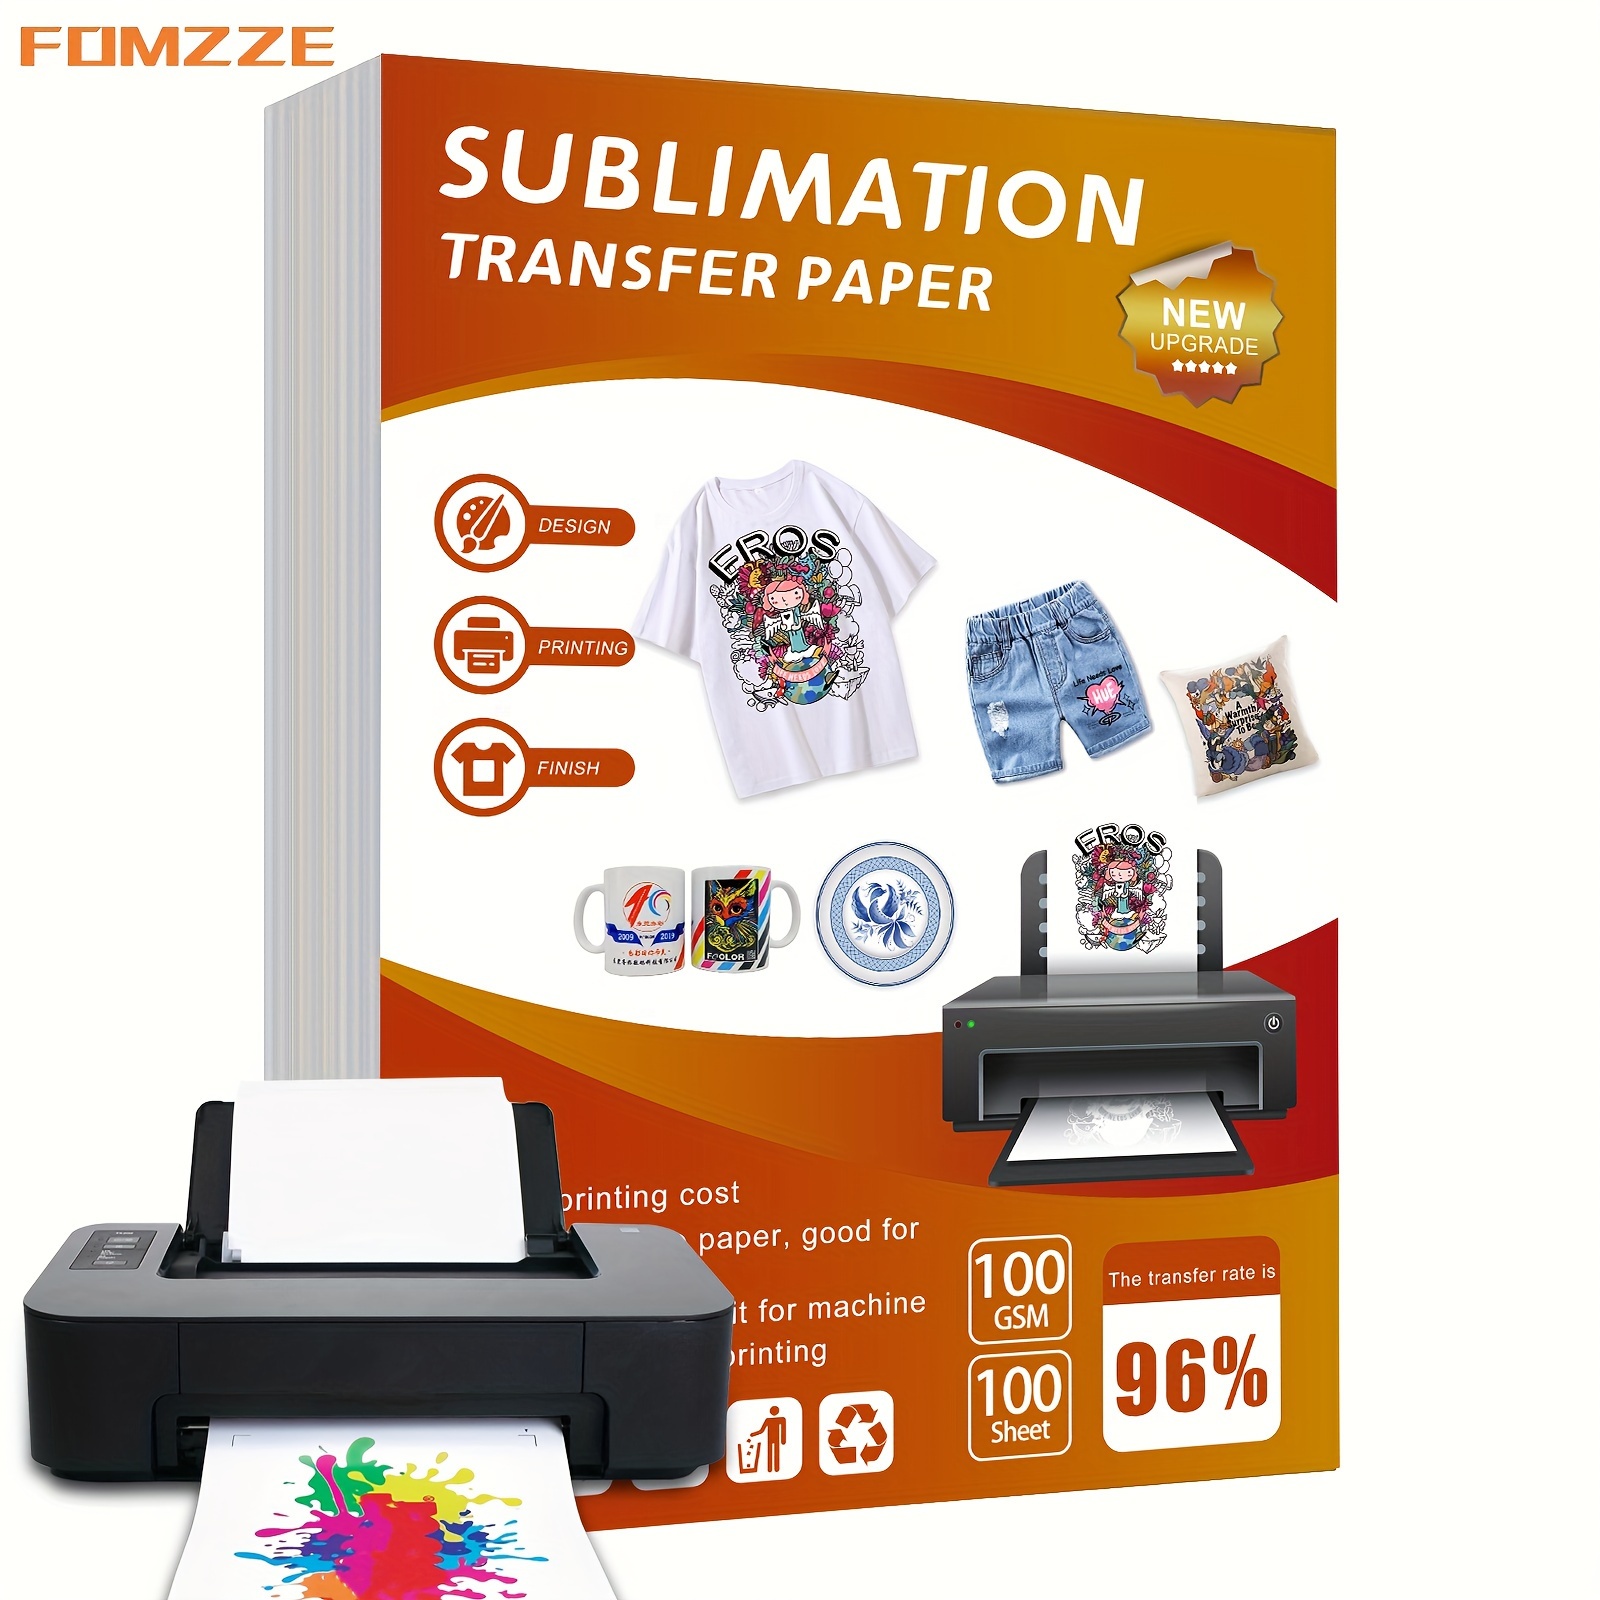 Sublimation Transfer Paper Sheets A4 for InkJet Printers 100 in a